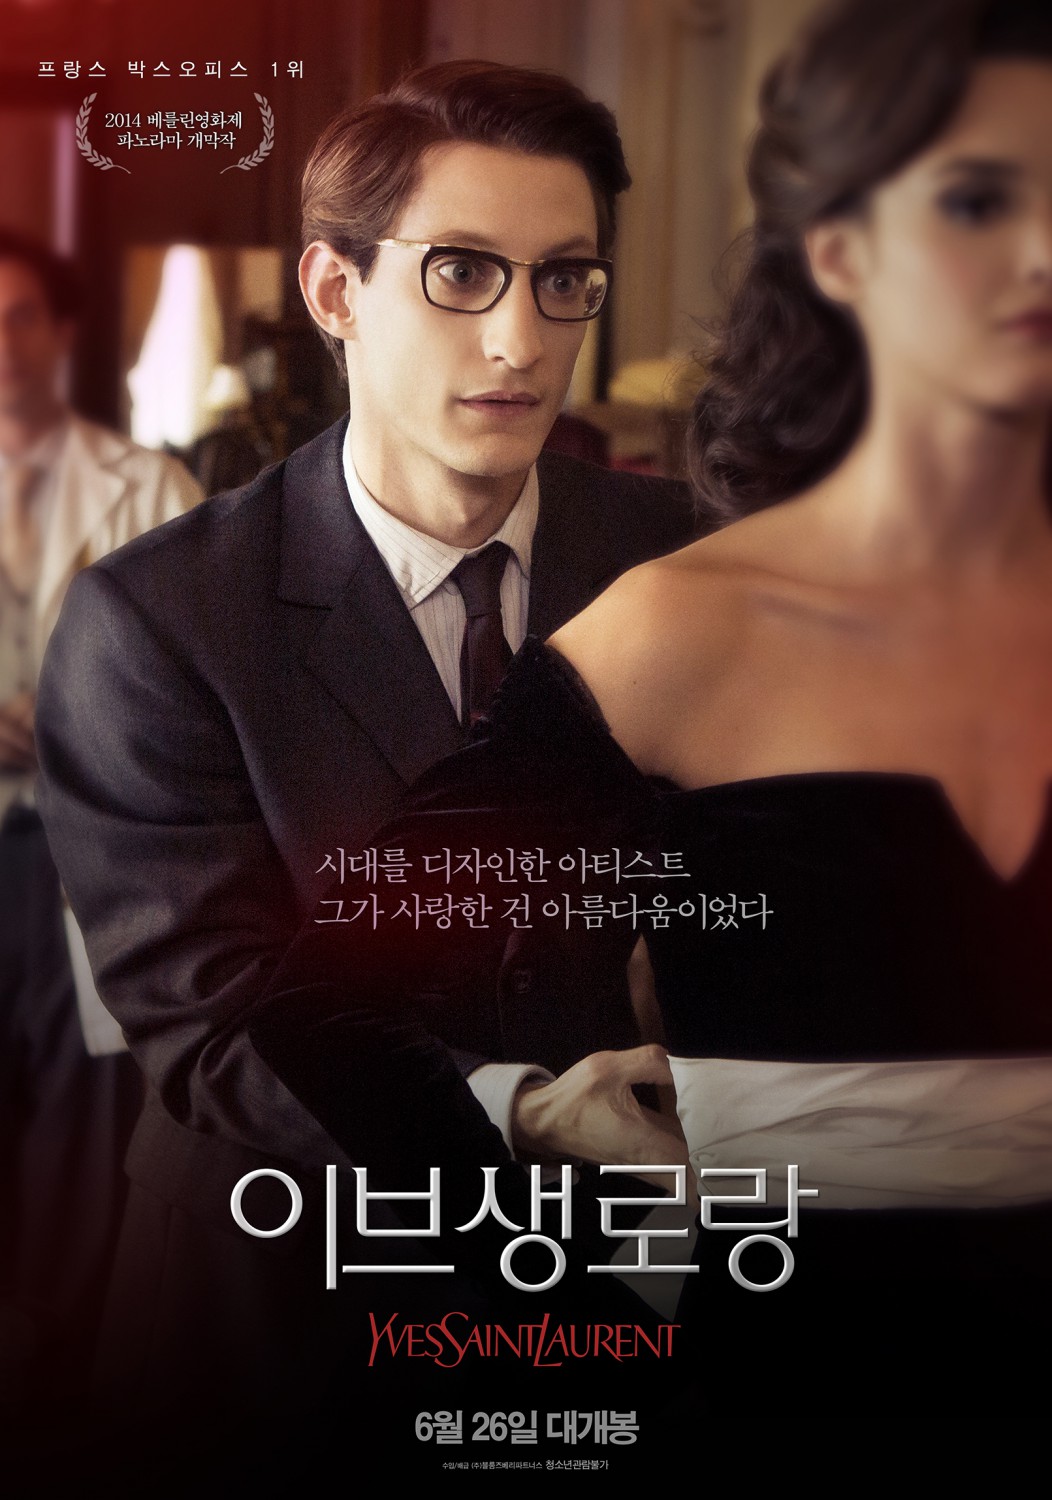 Extra Large Movie Poster Image for Yves Saint Laurent (#6 of 7)